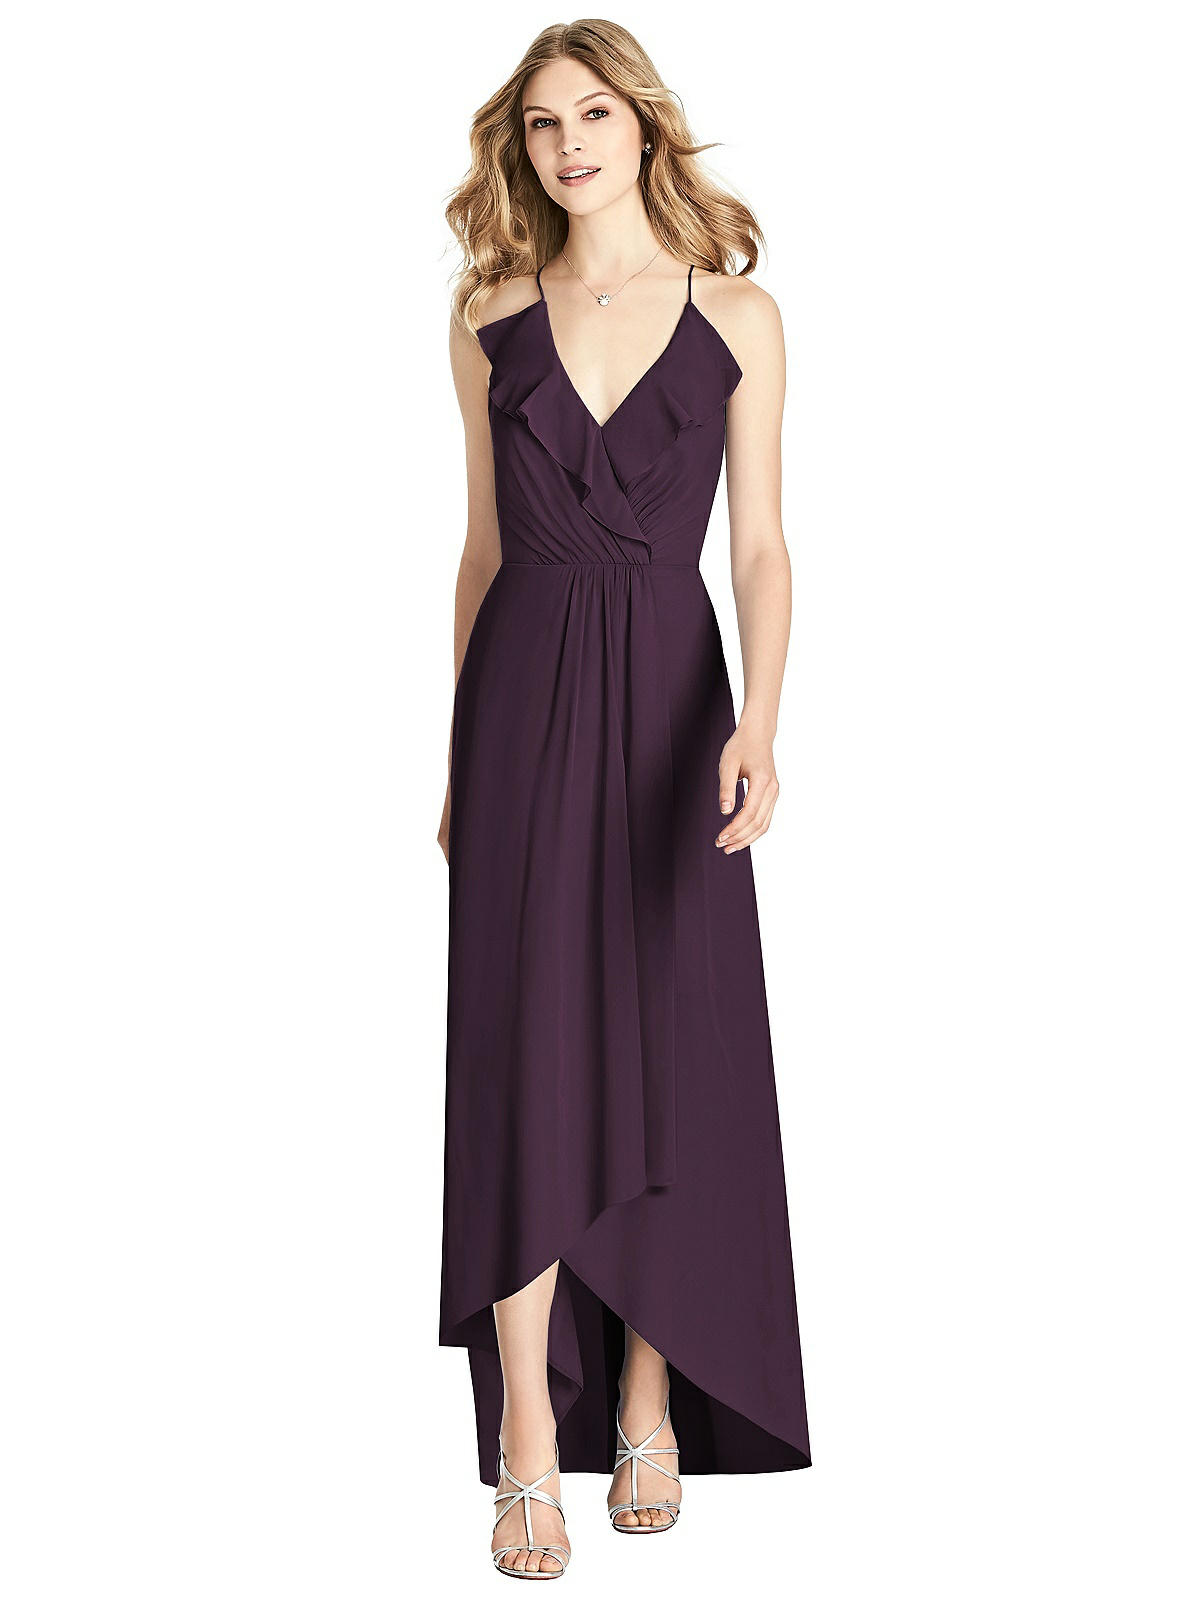 Ruffled Wrap High-Low Maxi Dress | The Dessy Group